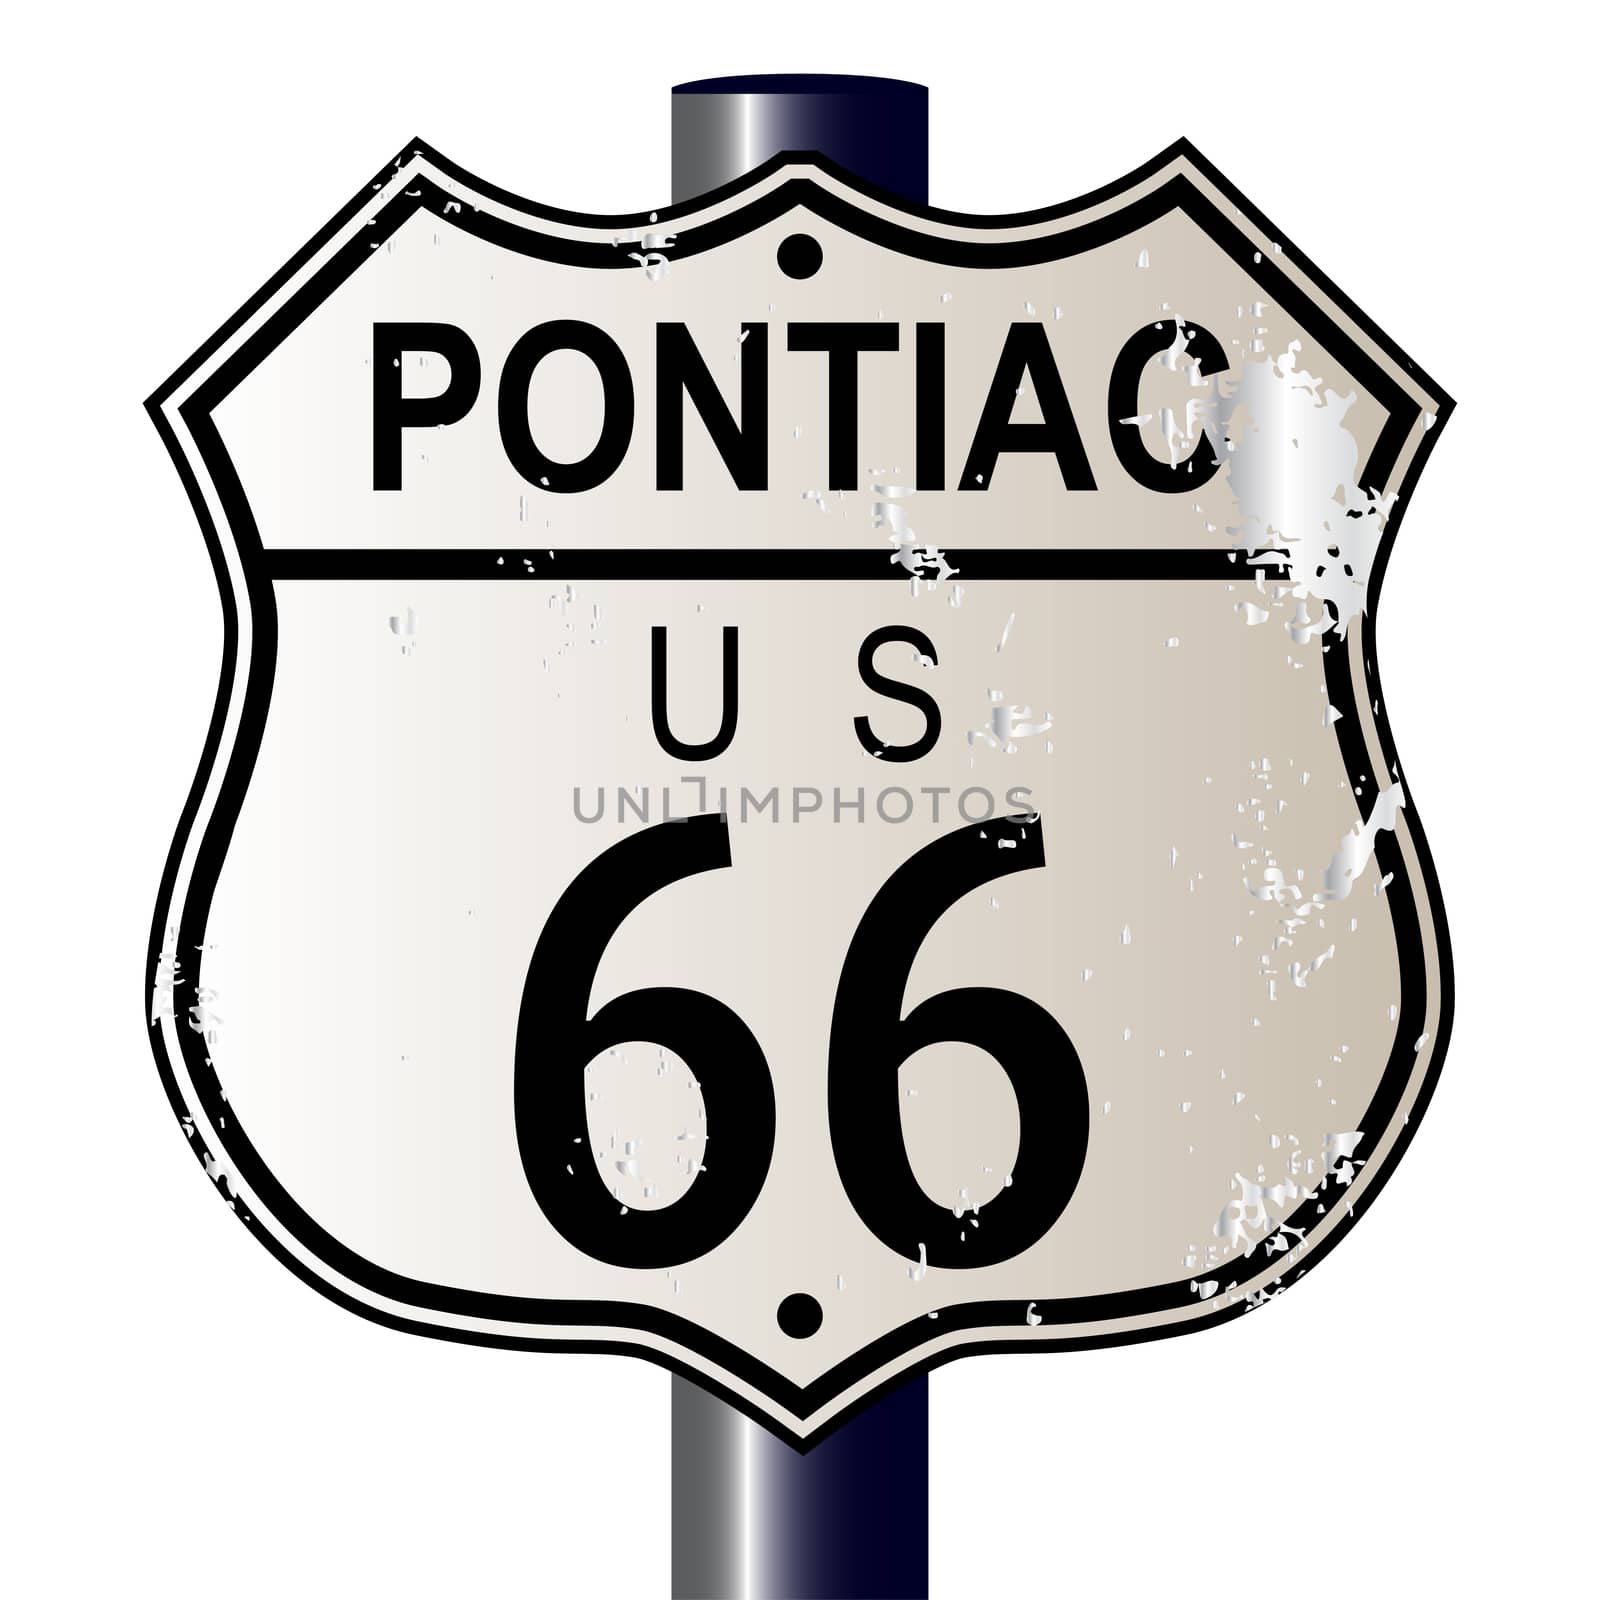 Pontiac Route 66 traffic sign over a white background and the legend ROUTE US 66